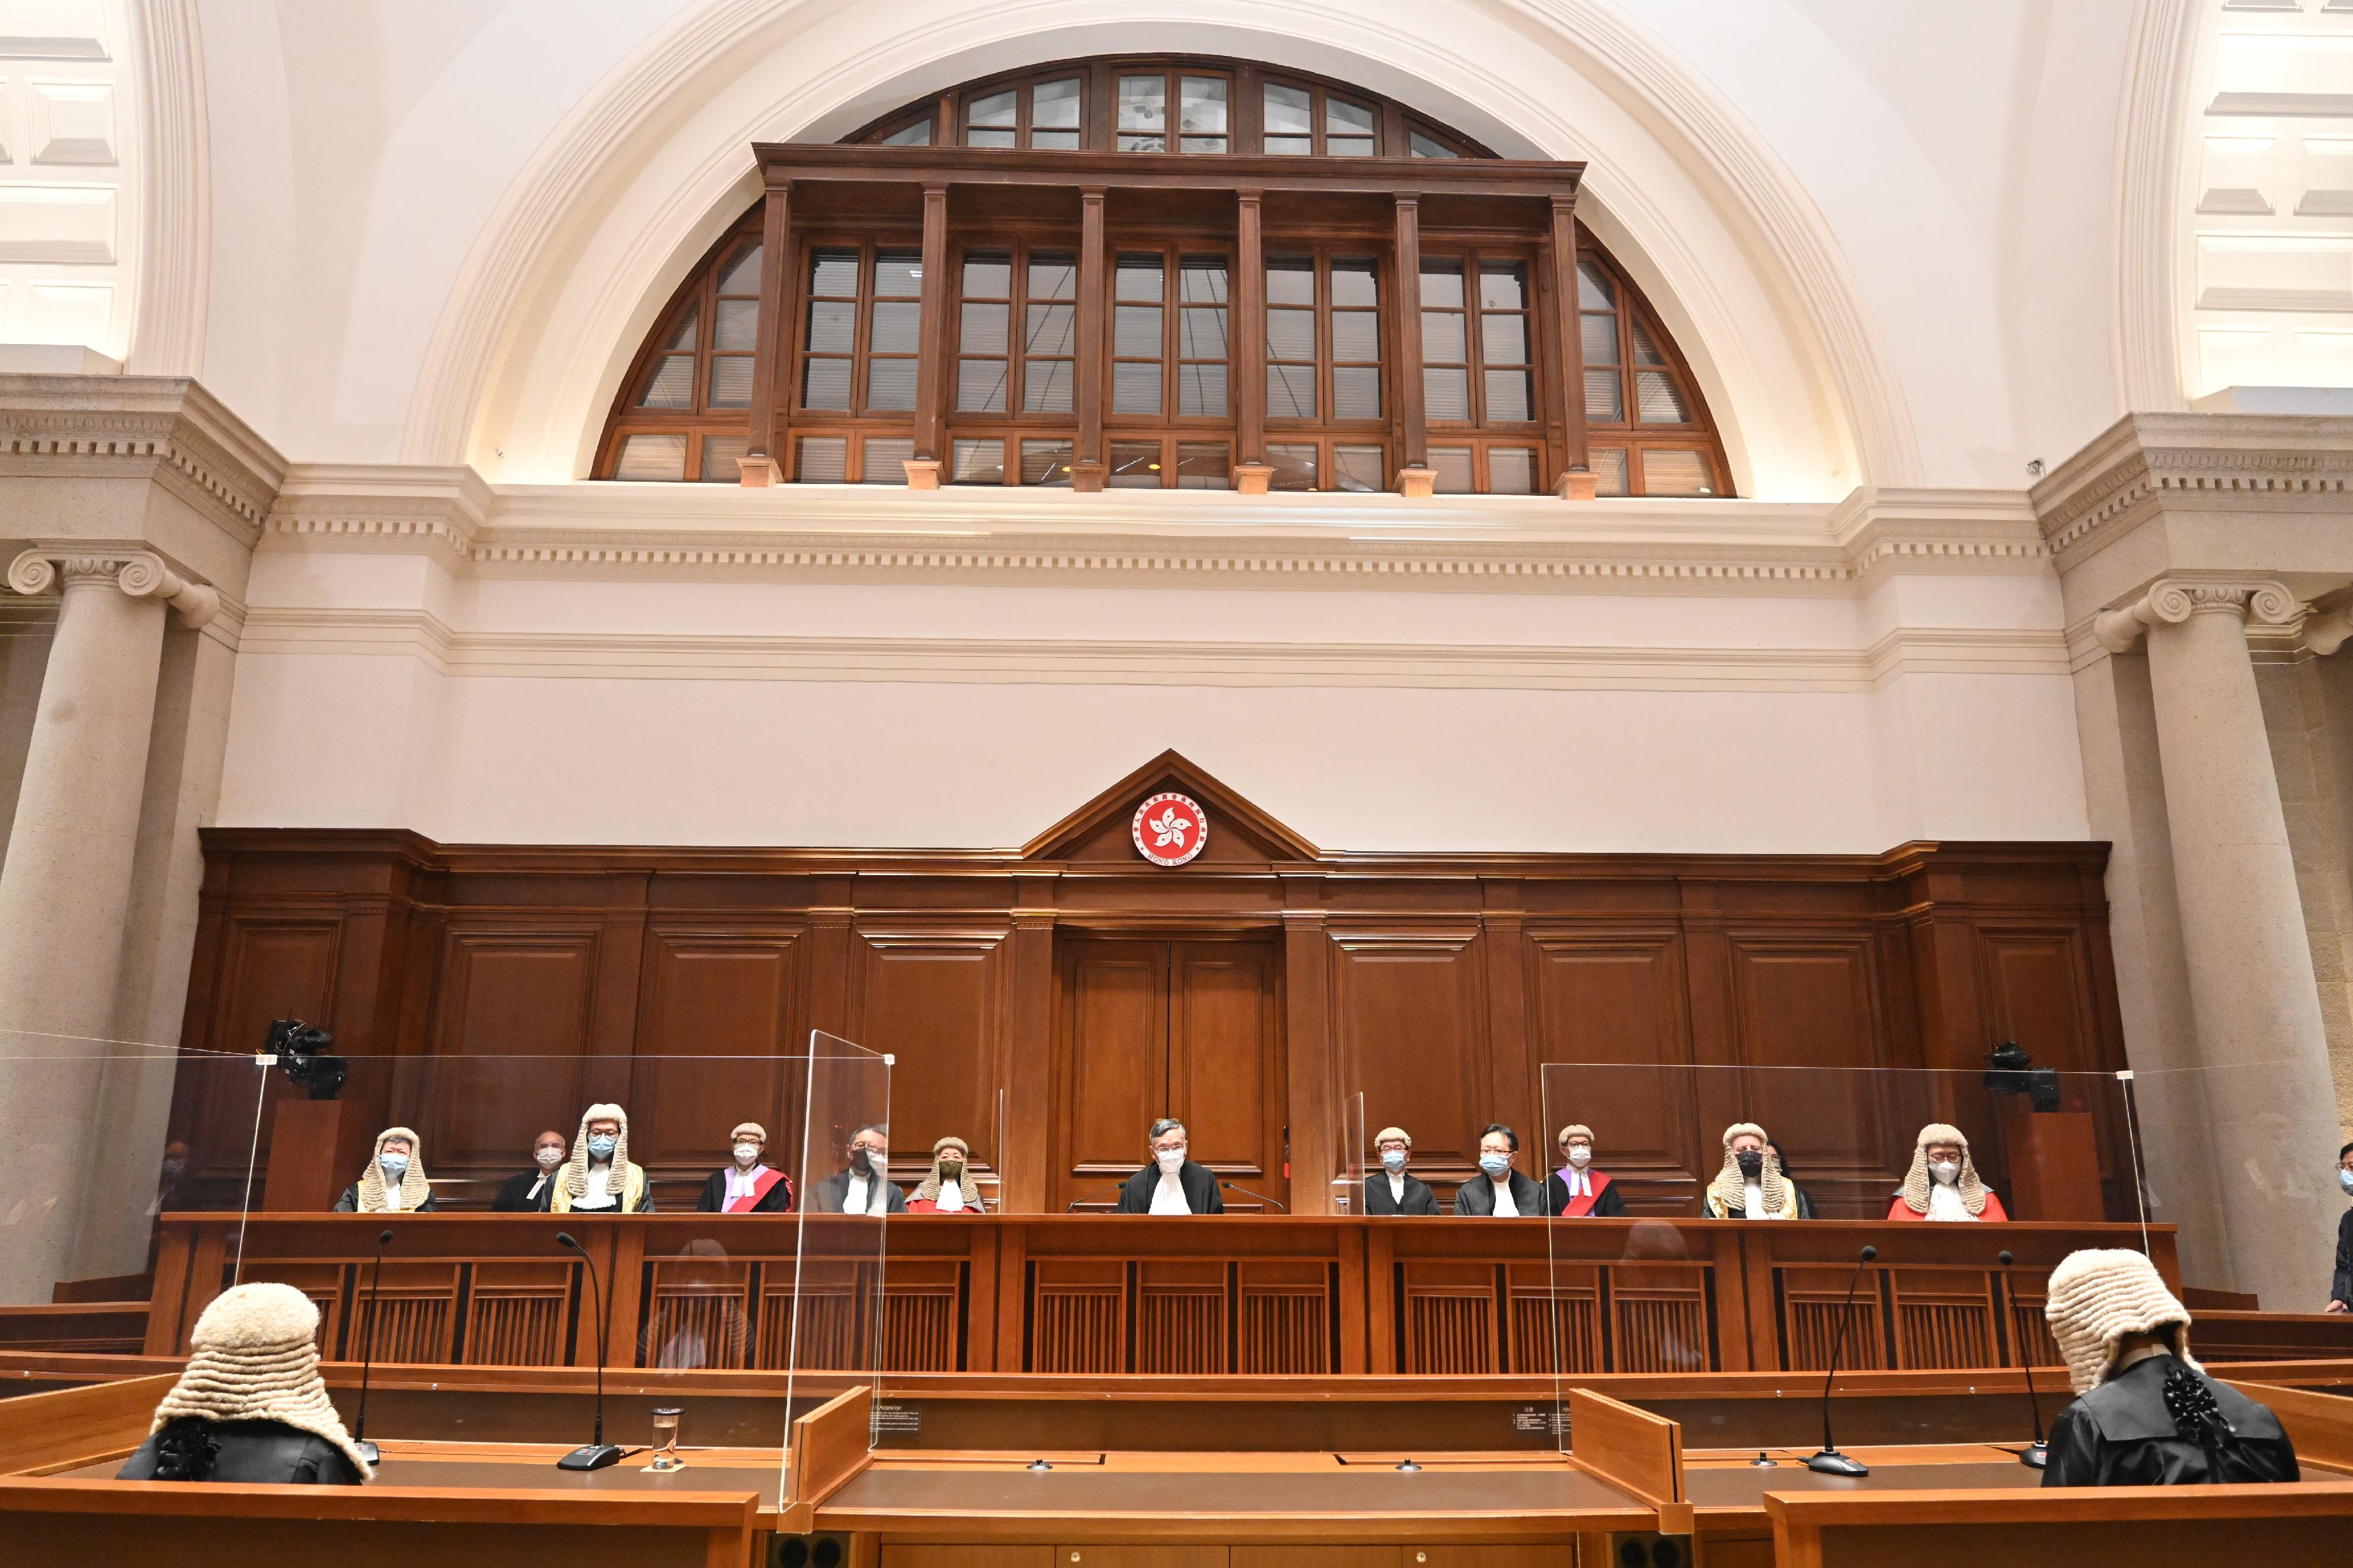 The Ceremonial Opening of the Legal Year 2022 was held at the Court of Final Appeal today (January 24).